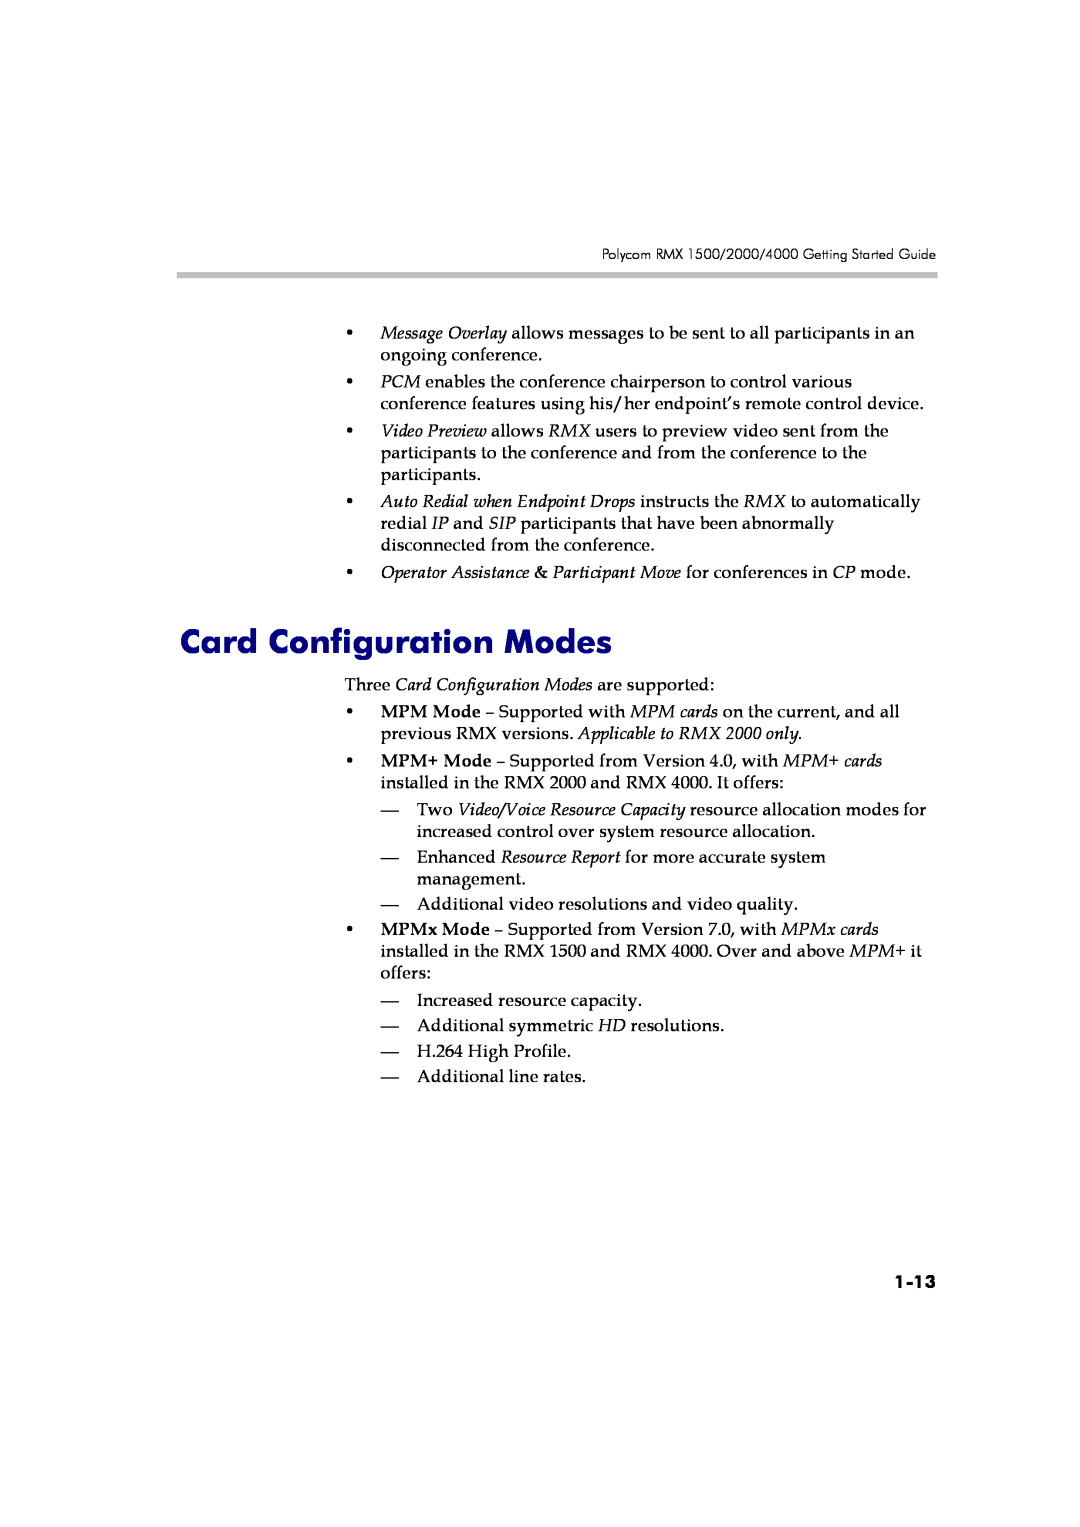 Polycom DOC2560A manual Card Configuration Modes, Operator Assistance & Participant Move for conferences in CP mode, 1-13 